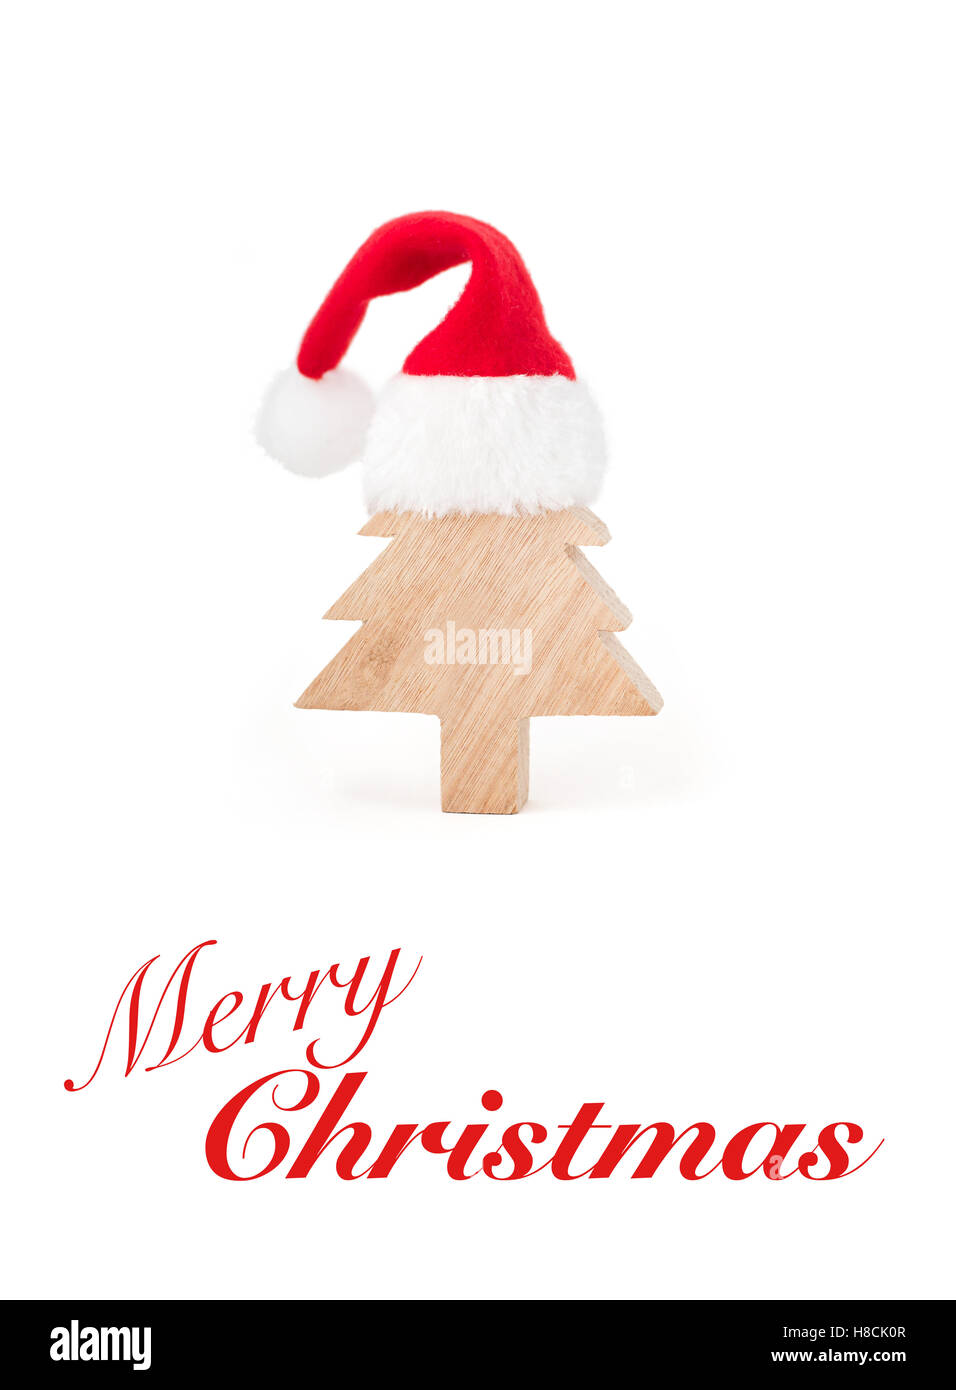 Cute Merry Christmas greeting card with a wooden christmas tree and red hat Stock Photo